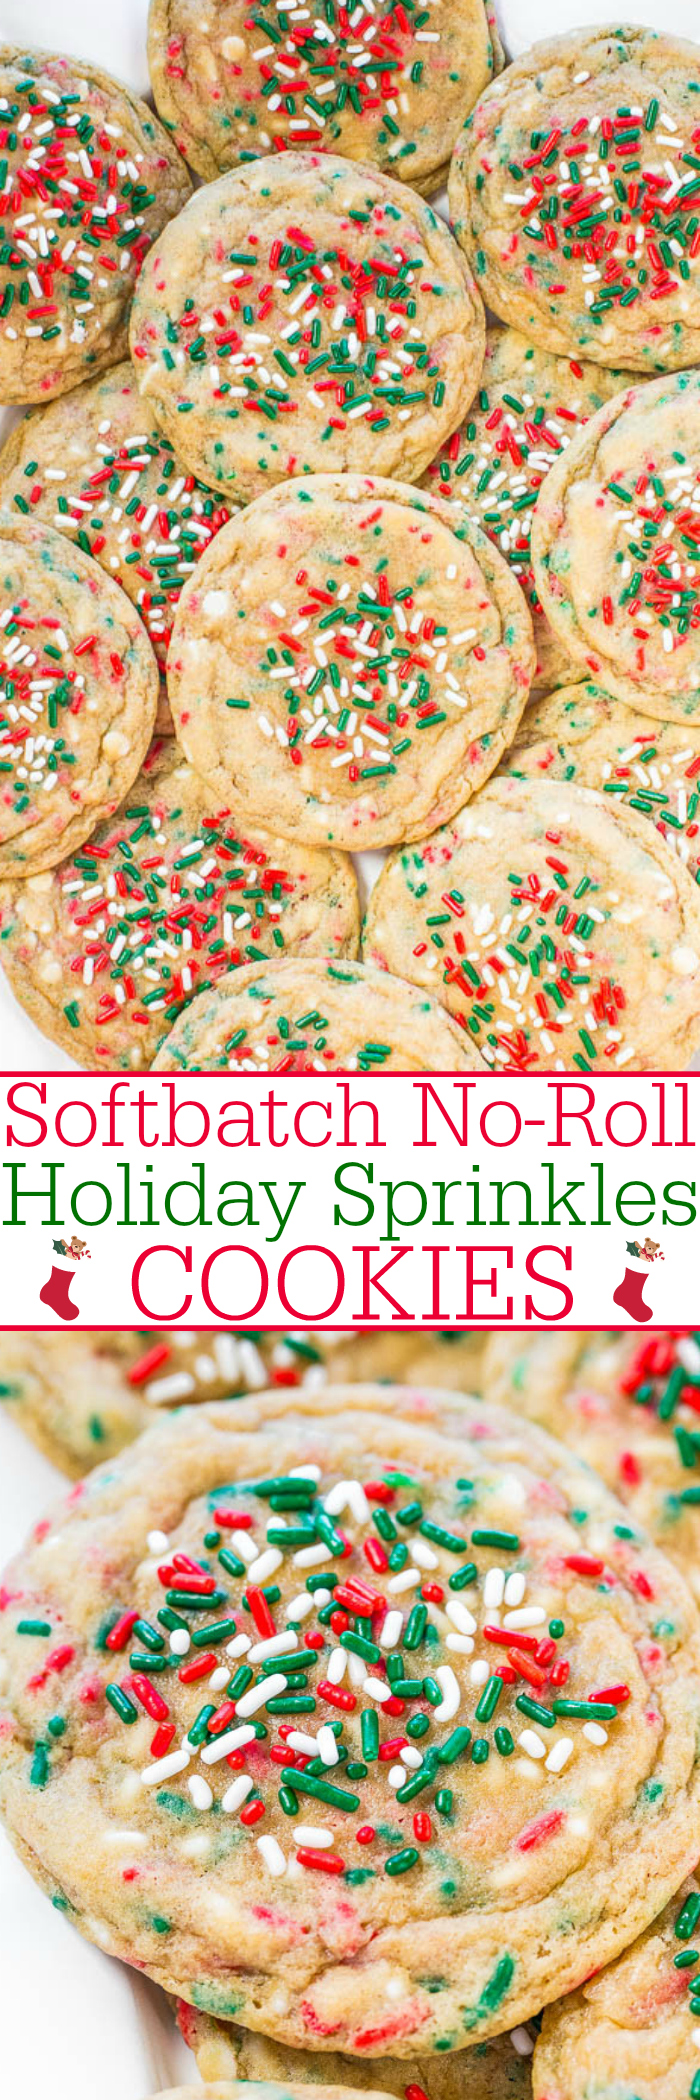 Softbatch No-Roll Holiday Sprinkles Cookies - No-roll dough with sprinkles baked in so you don't have to decorate cookies!! Big timesavers! Everyone loves these soft, buttery cookies loaded with sprinkles!!